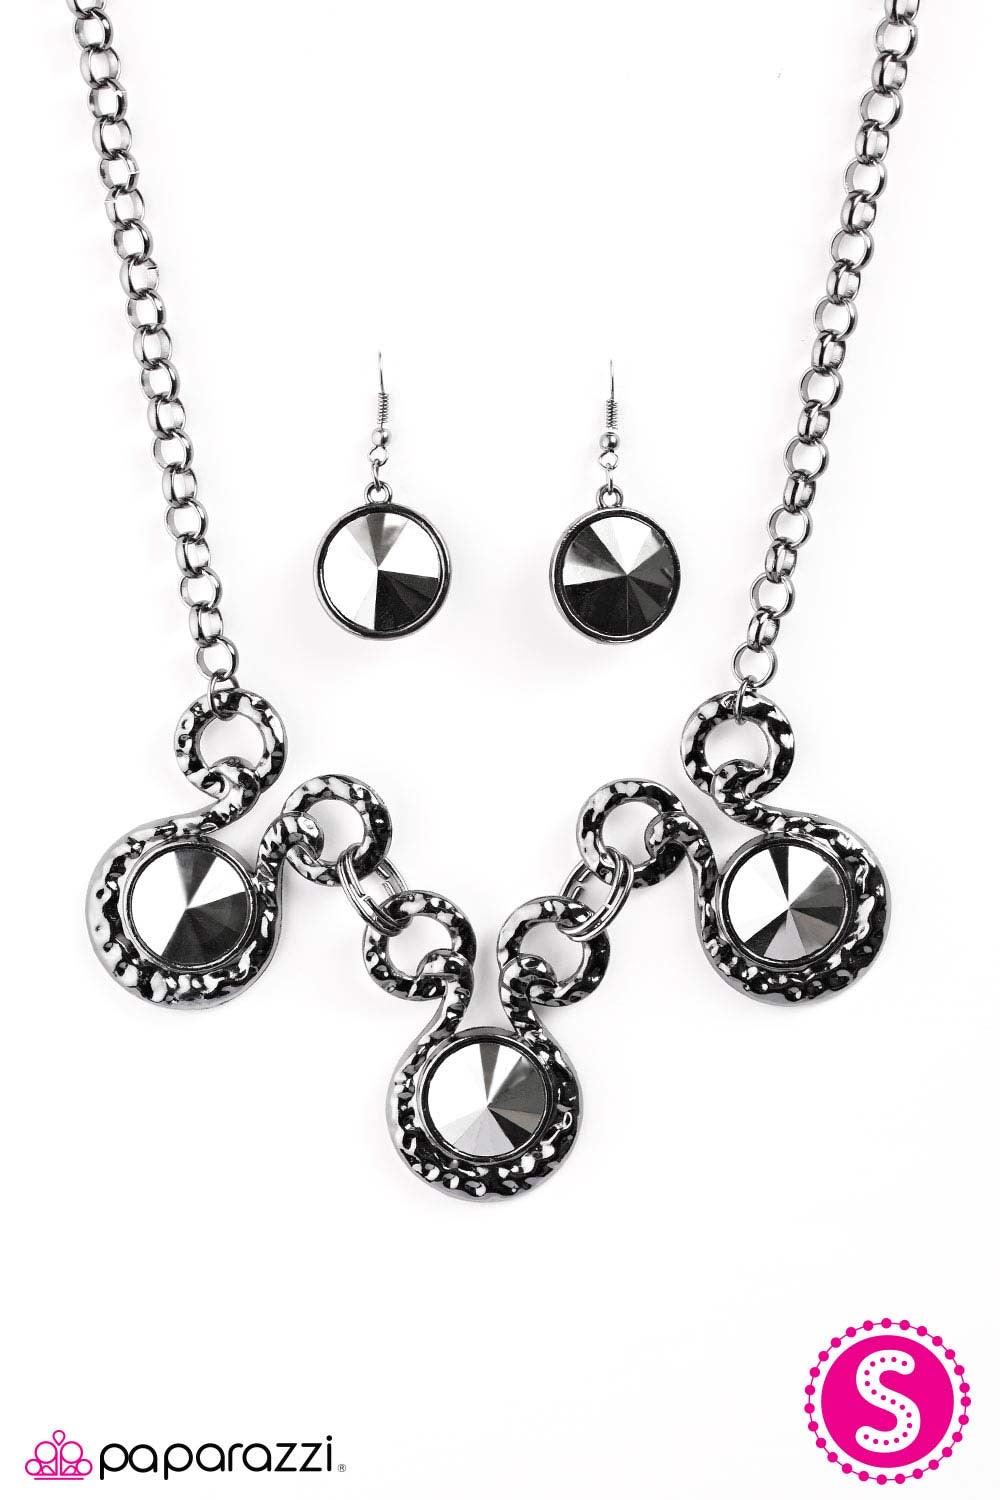 Paparazzi Accessories Hypnotize - Black Three dramatically oversized pieces of hematite are nestled into three textured gunmetal fittings that are connected by oval gunmetal rings, creating a brilliant statement piece. Features an adjustable clasp closure